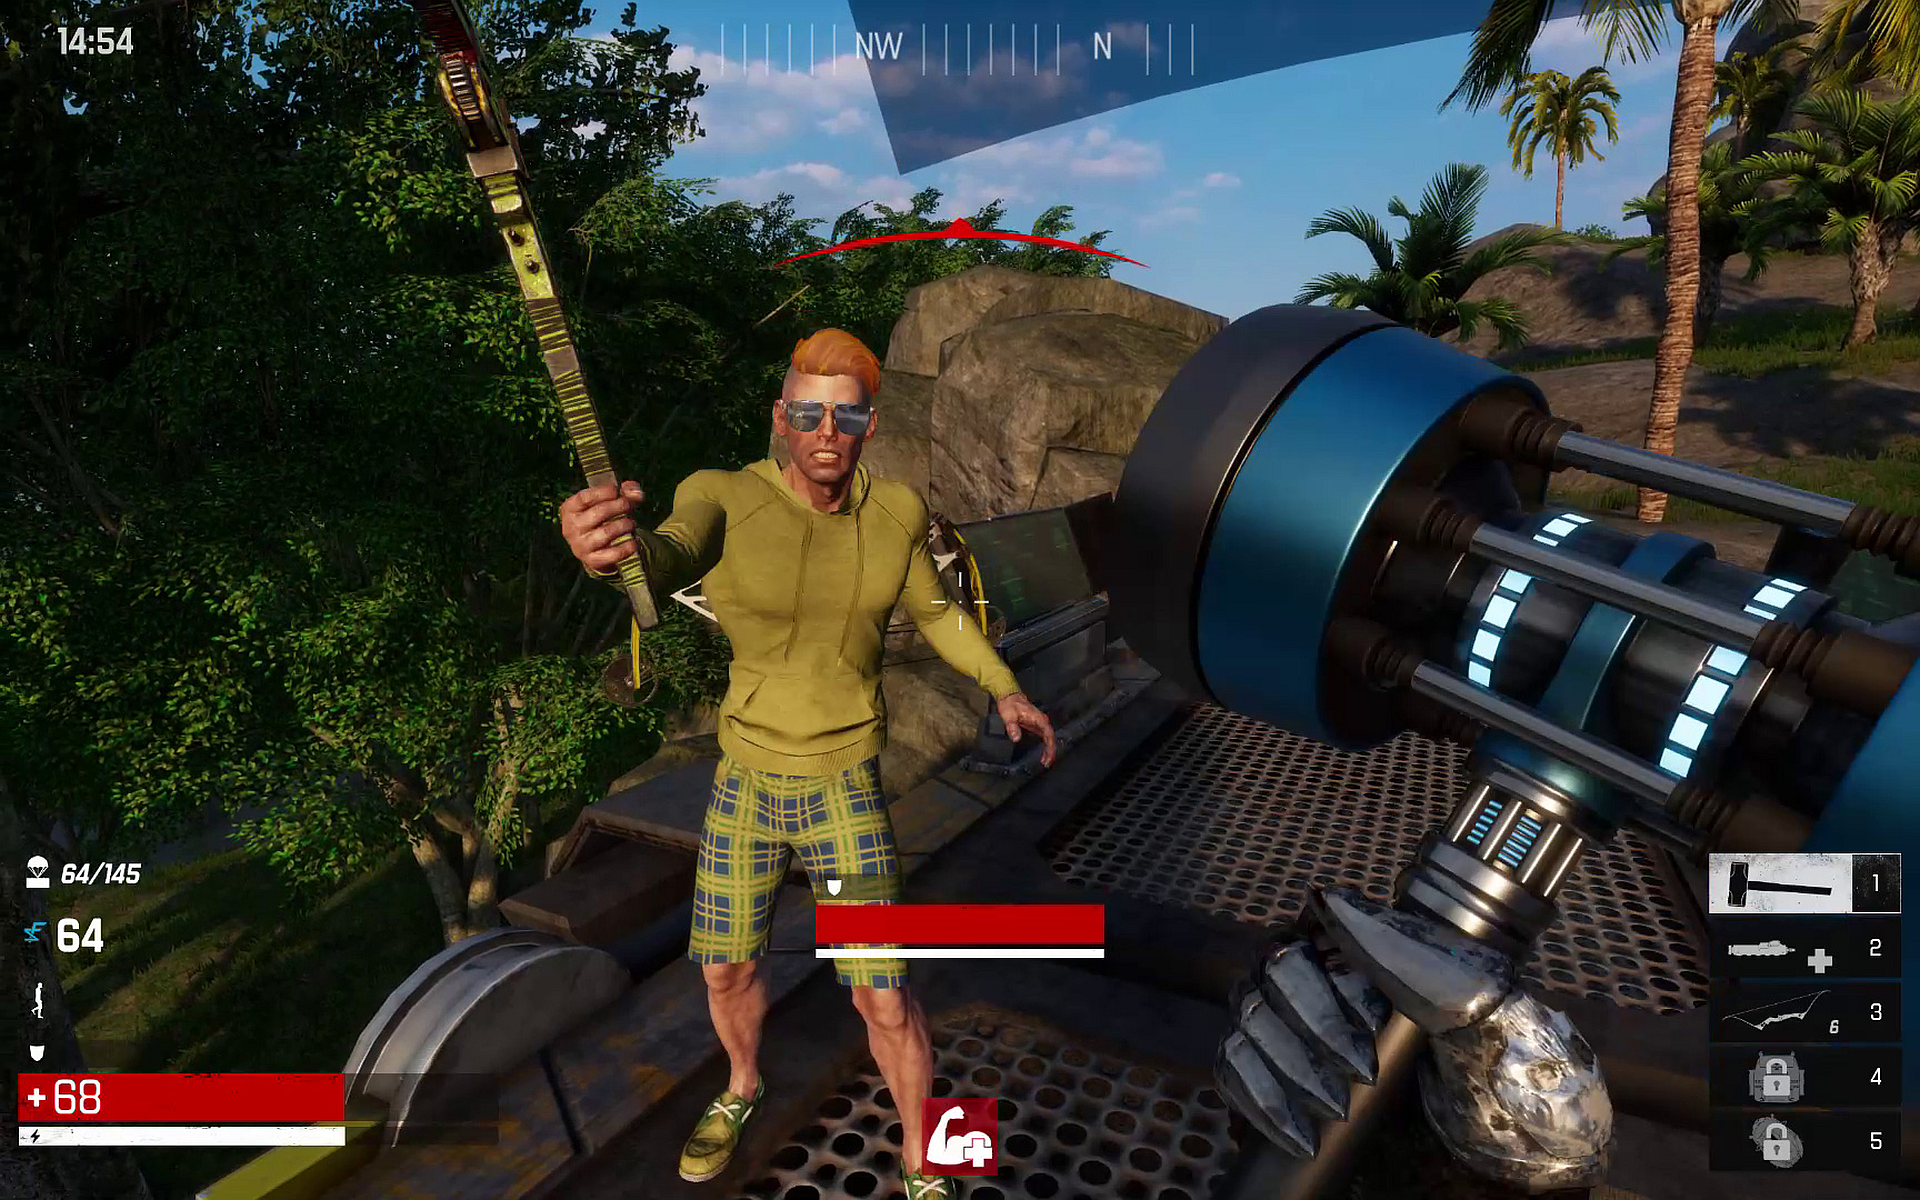 What happened to The Culling 2 – “Whatever chance it had to